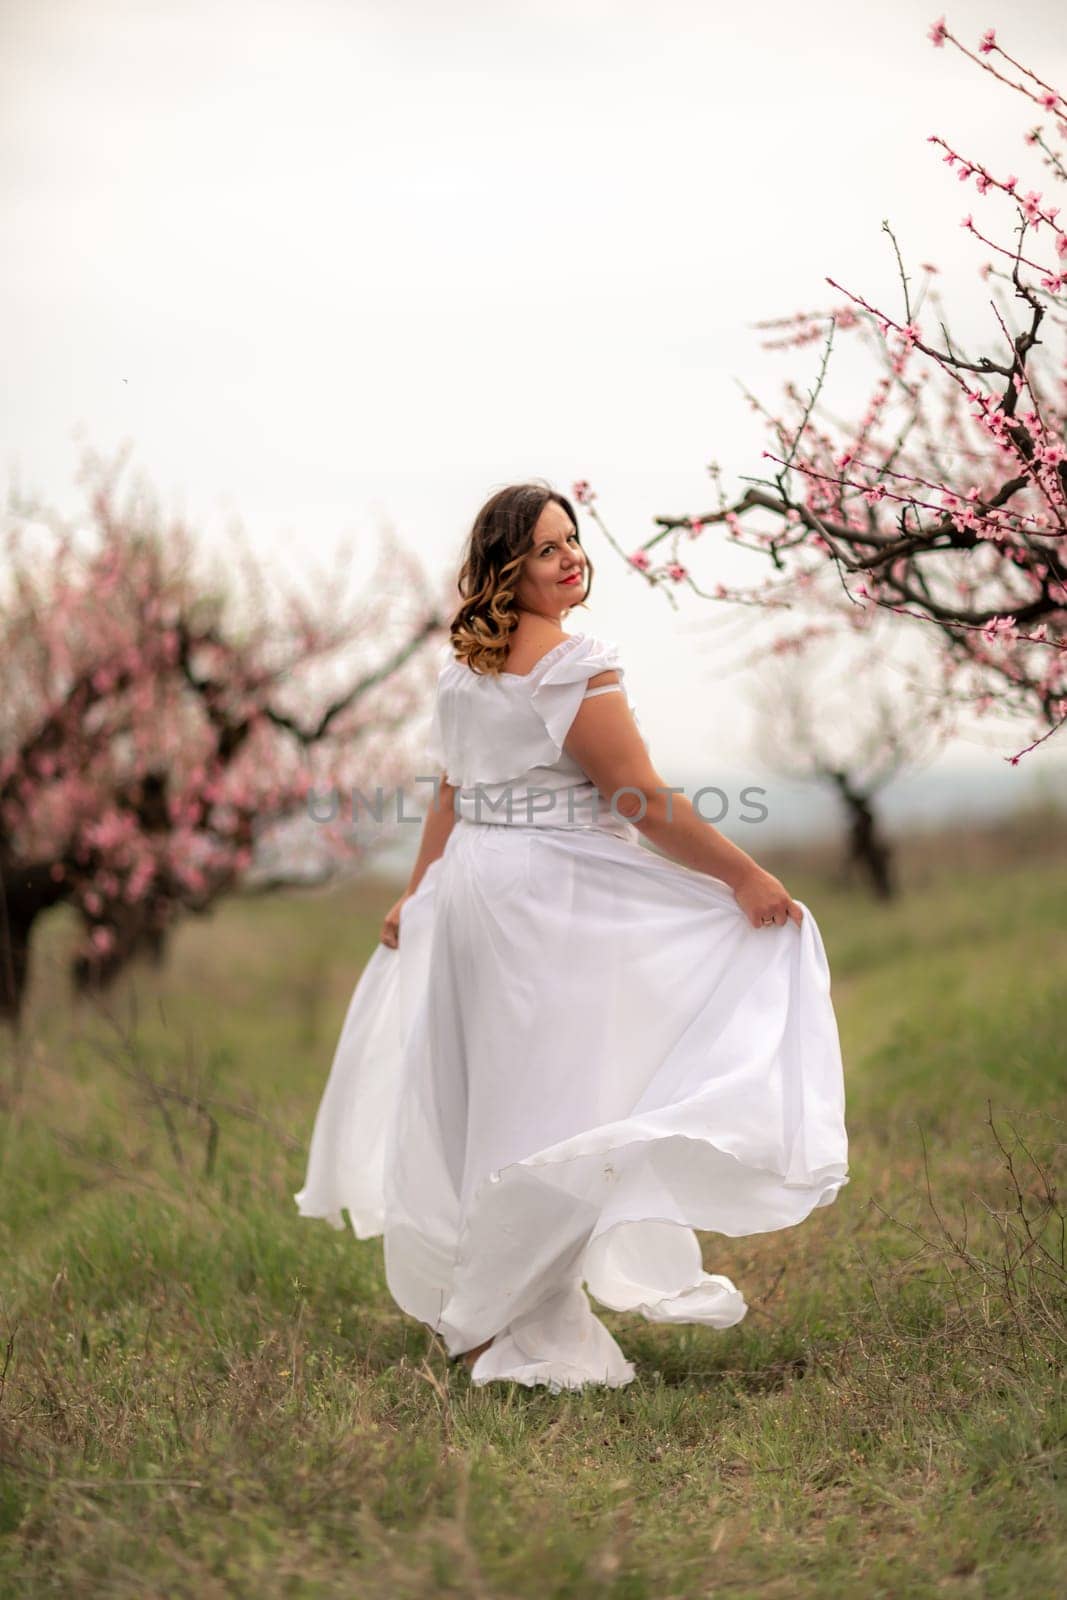 Woman peach blossom. Happy woman in white dress walking in the garden of blossoming peach trees in spring by Matiunina